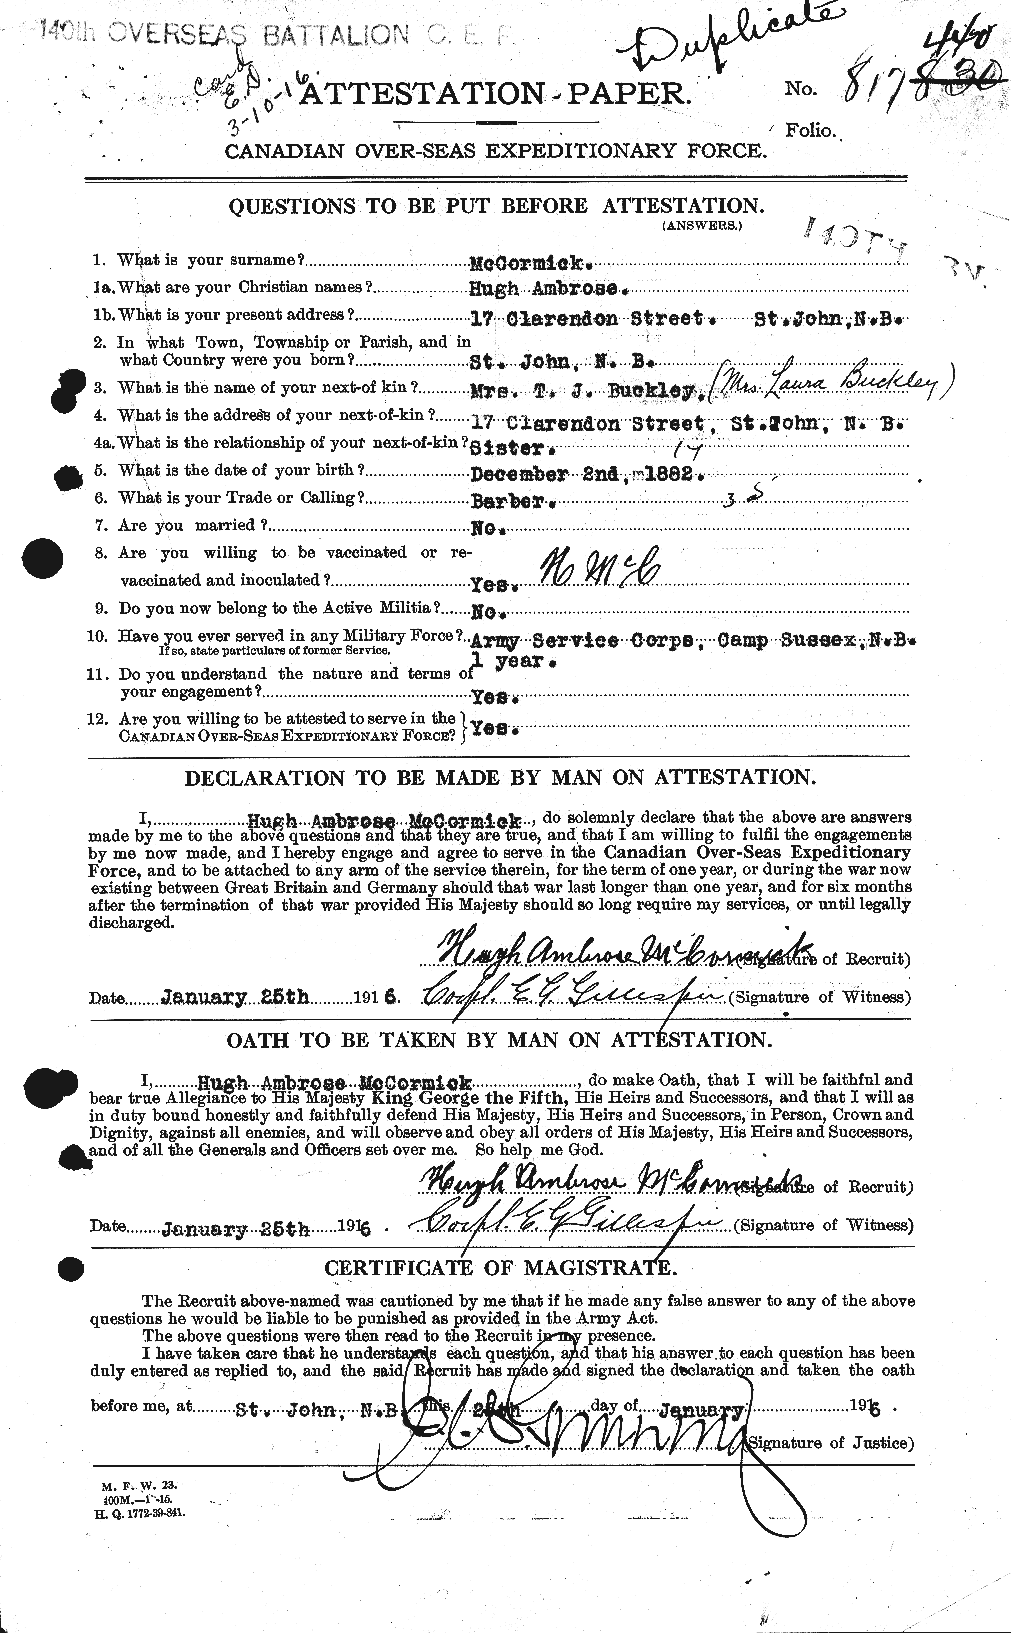 Personnel Records of the First World War - CEF 133735a